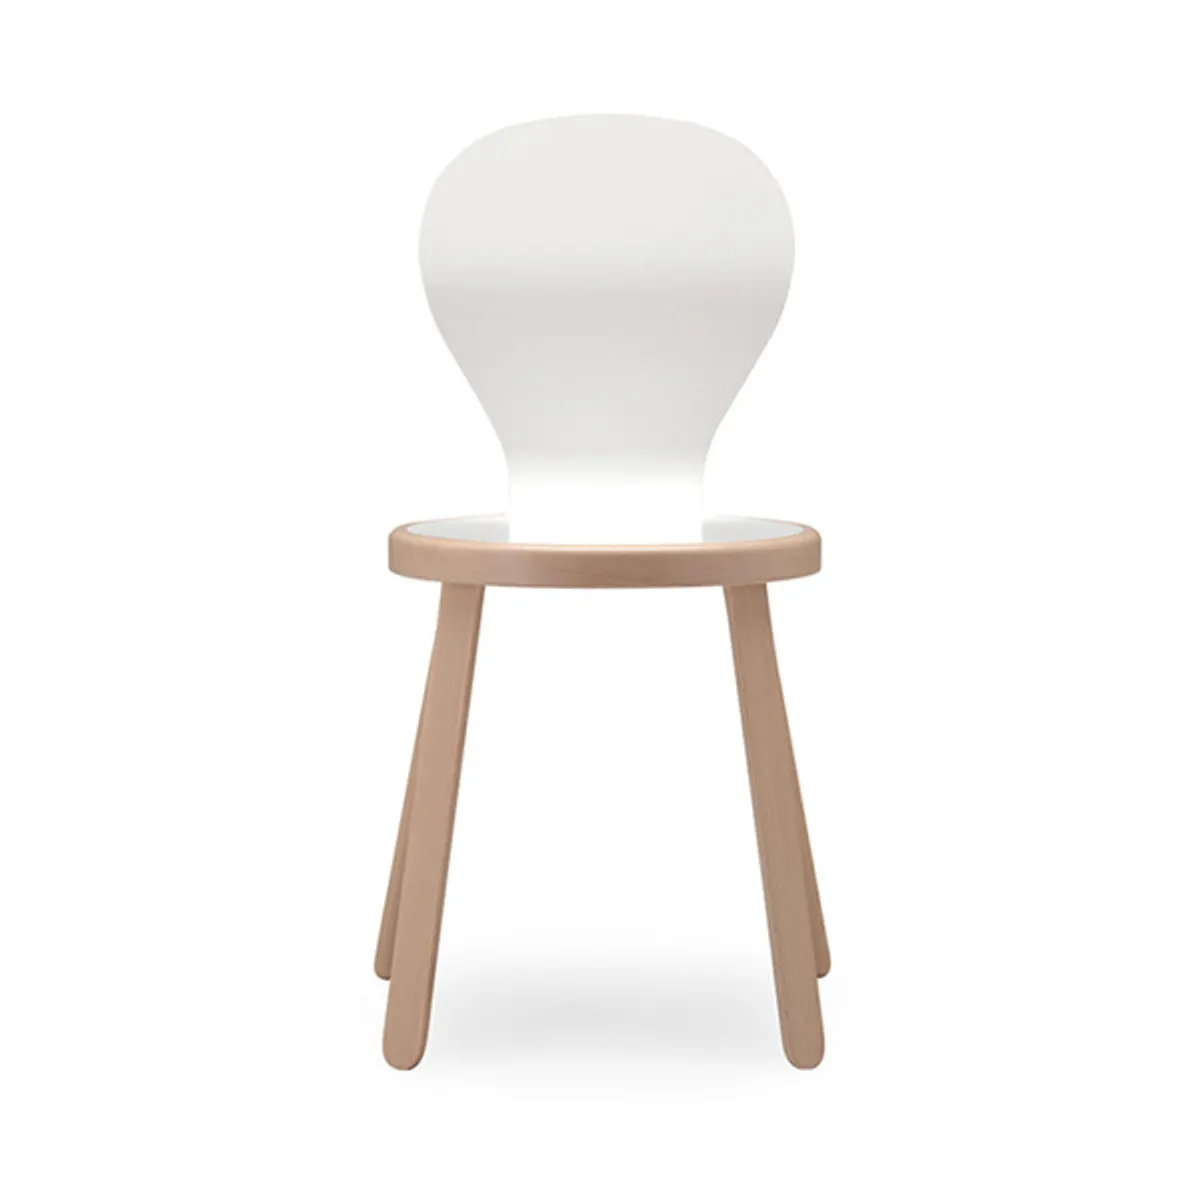 Lola Side Chair White Natural Inside Out Contracts